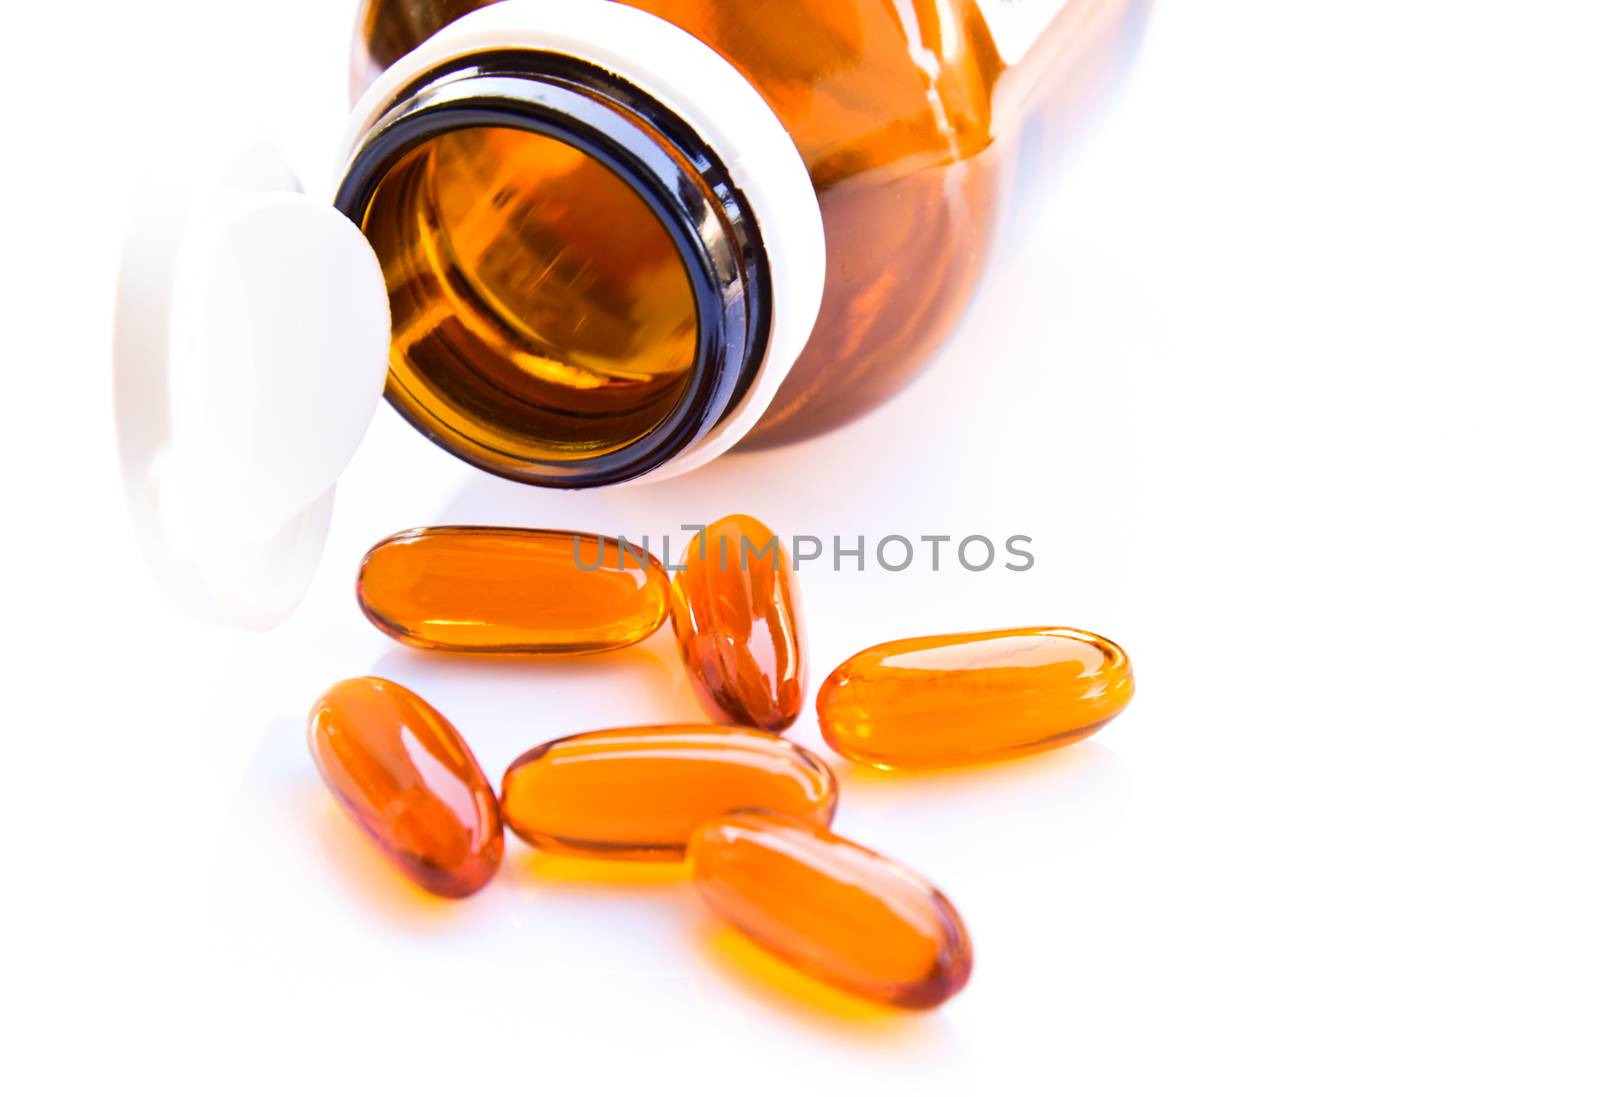 Lecithin gel vitamin supplement capsules isolated on white background